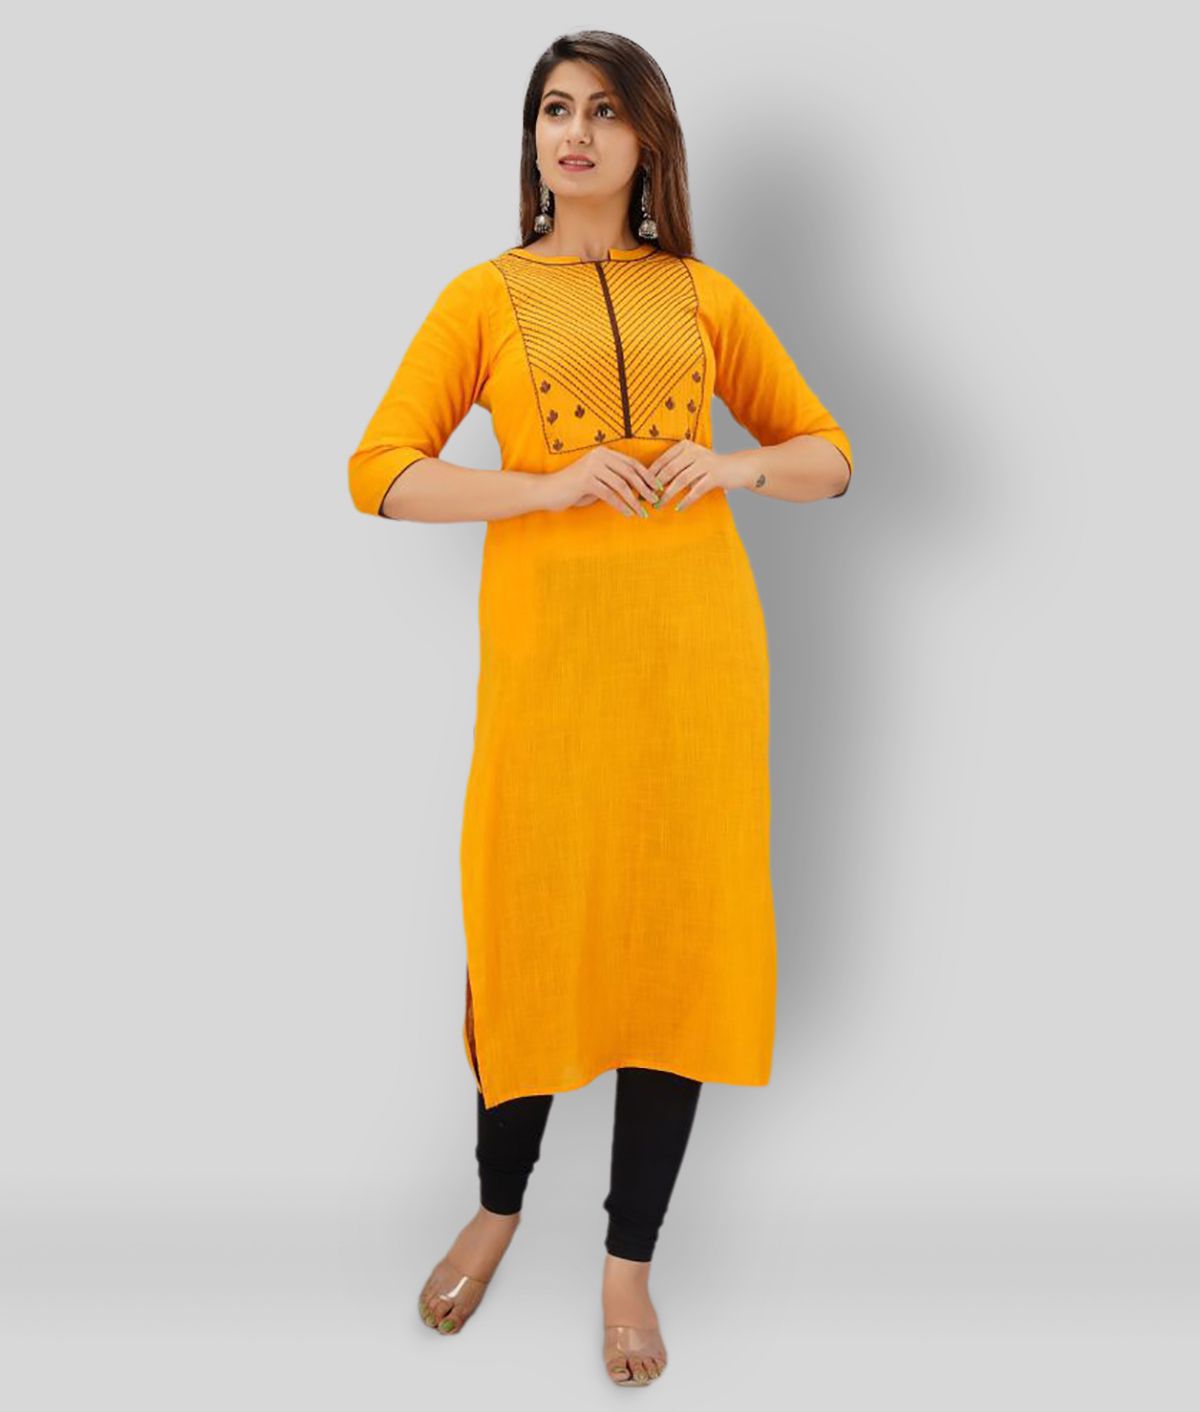 Kapadia  Green Rayon Womens Straight Kurti  Pack of 1   Buy Kapadia   Green Rayon Womens Straight Kurti  Pack of 1  Online at Best Prices in  India on Snapdeal